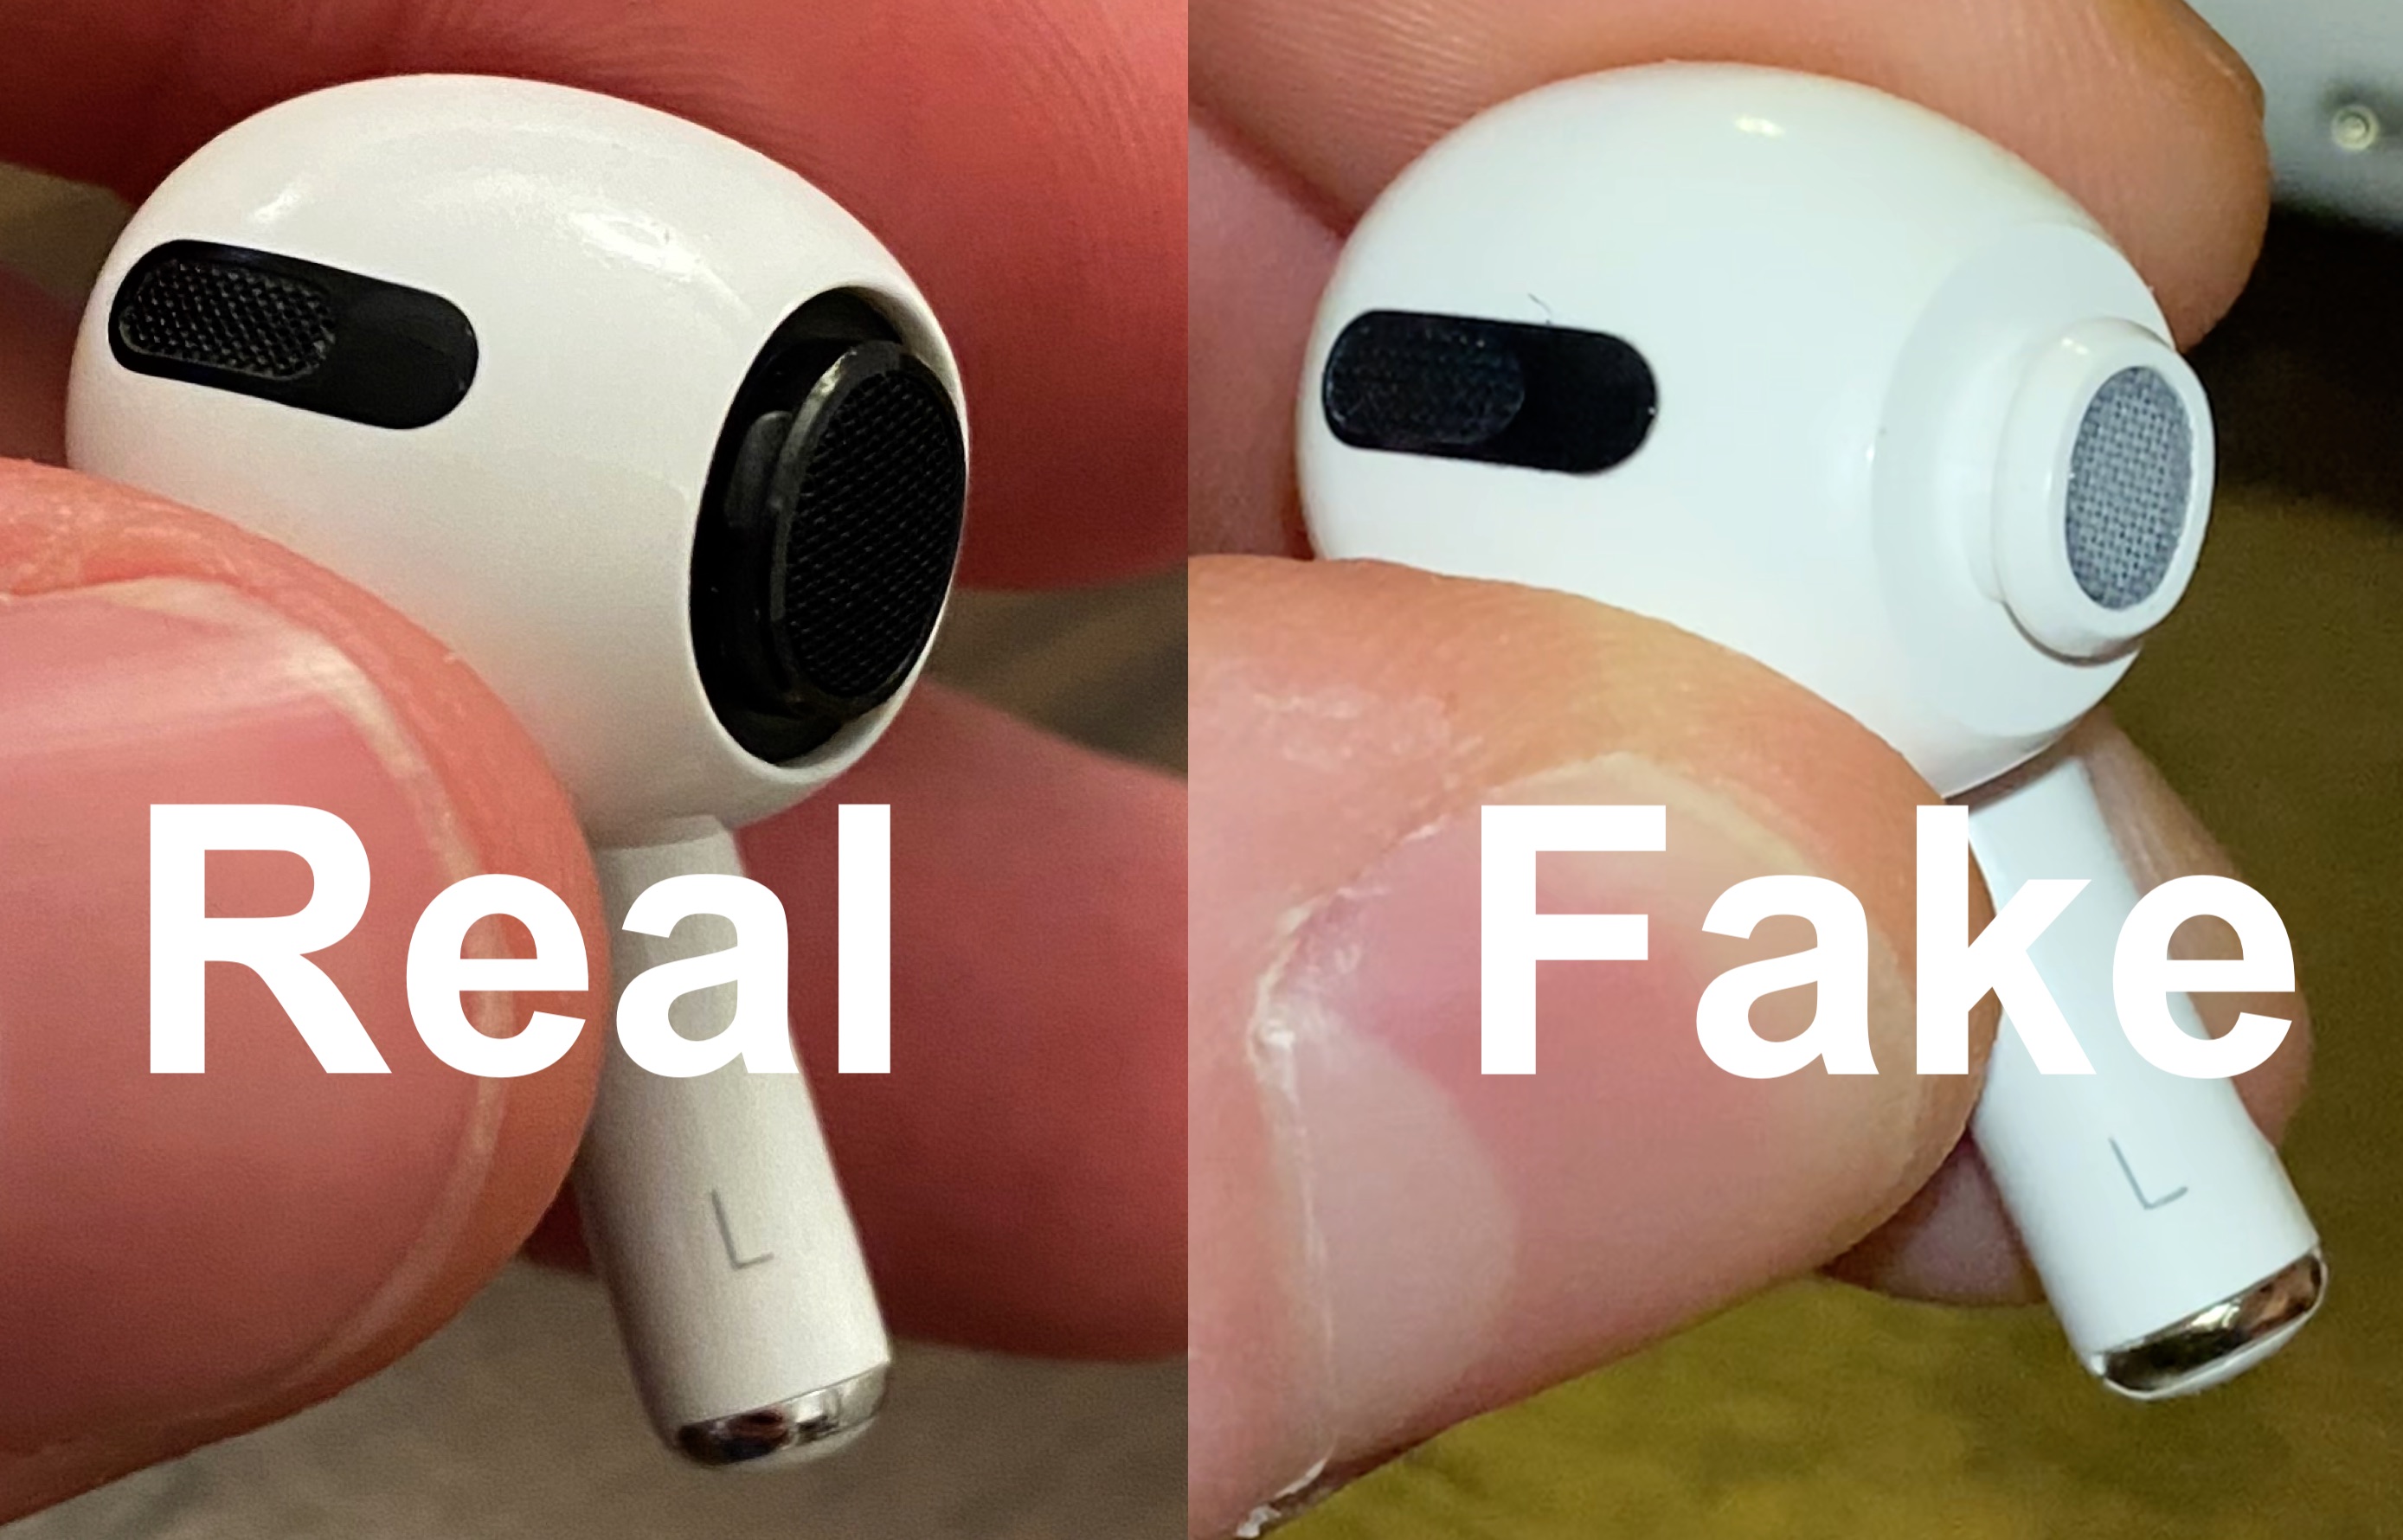 How to Identify Fake AirPods Pro | Popovich